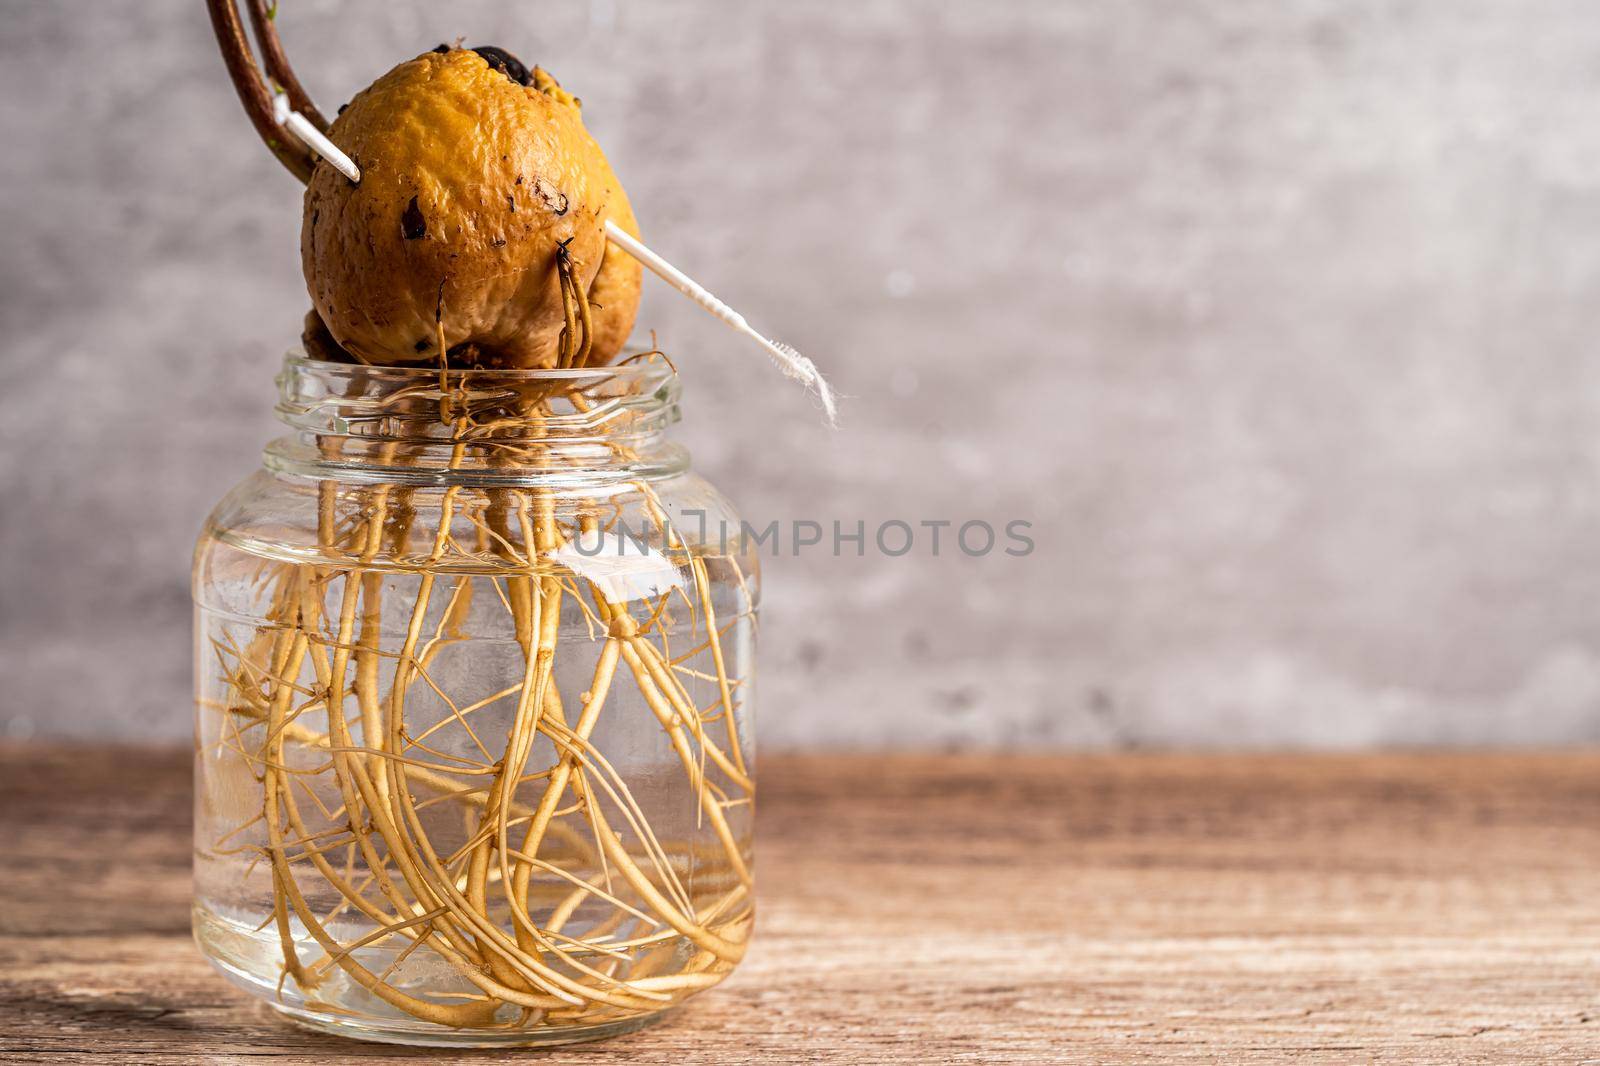 Avocado sprout plant from the seed grow with root in water glass.